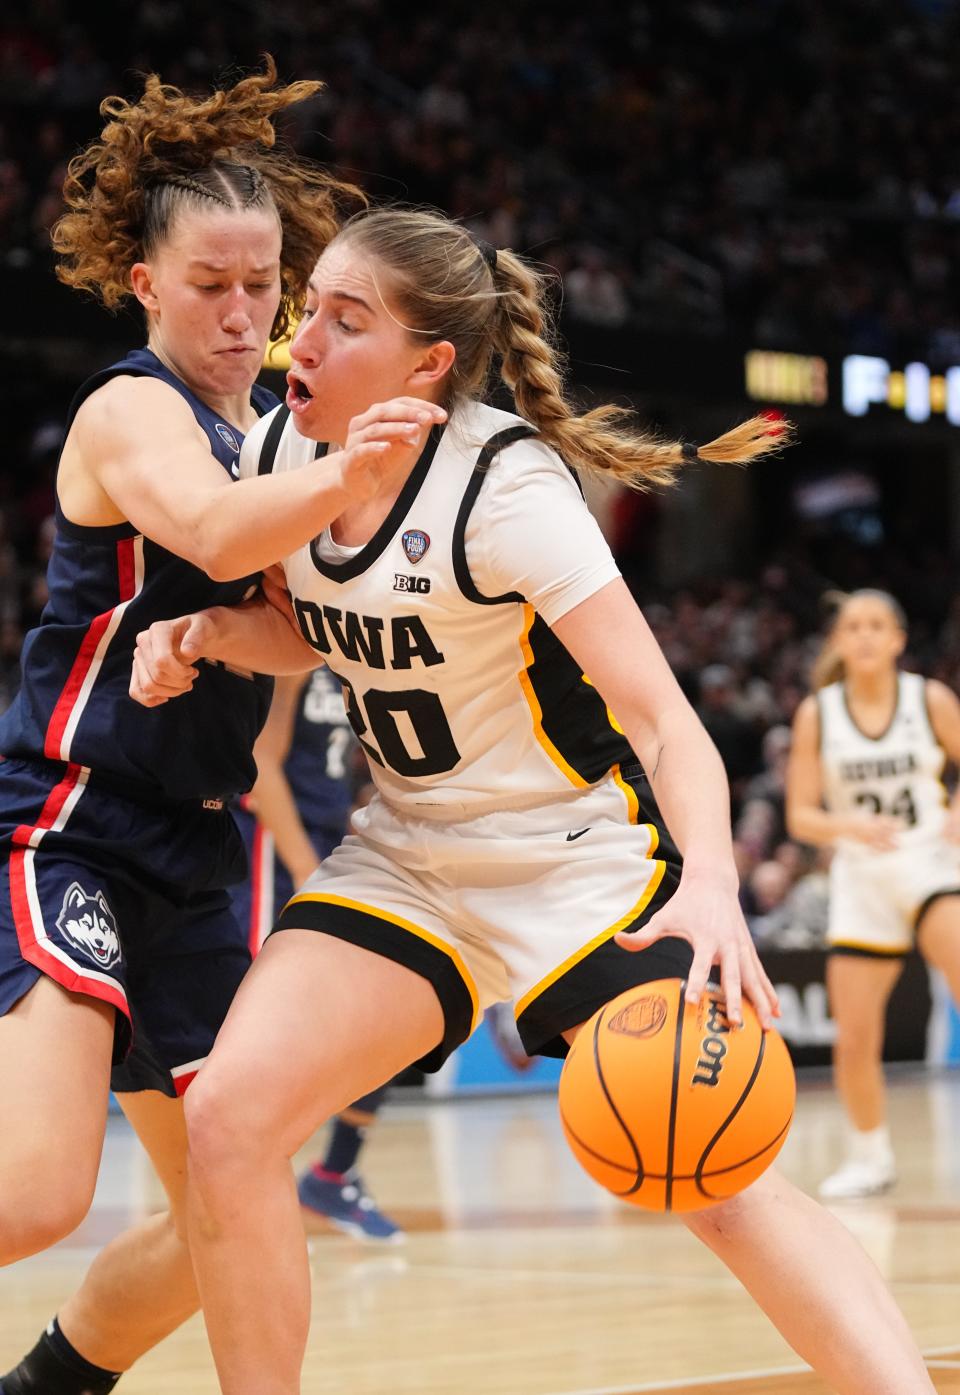 Iowa guard Kate Martin (20) drives to the basket as Connecticut's Ashlynn Shade (12) defends during Friday's national semifinal game.